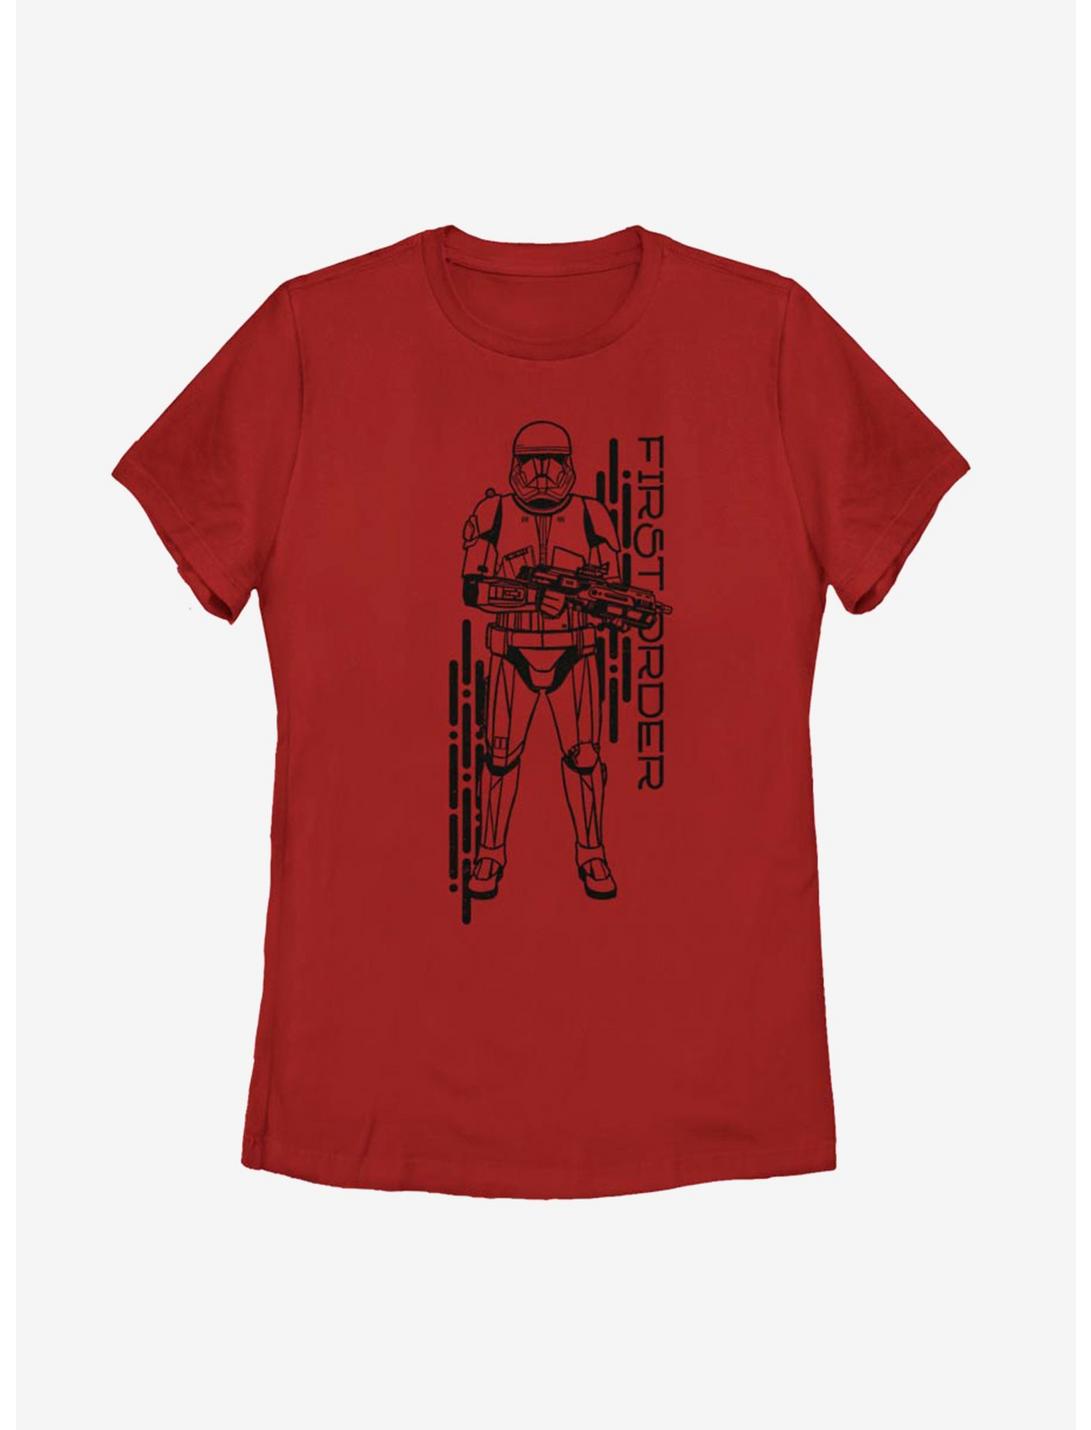 Star Wars Episode IX The Rise Of Skywalker Project Red Womens T-Shirt, RED, hi-res